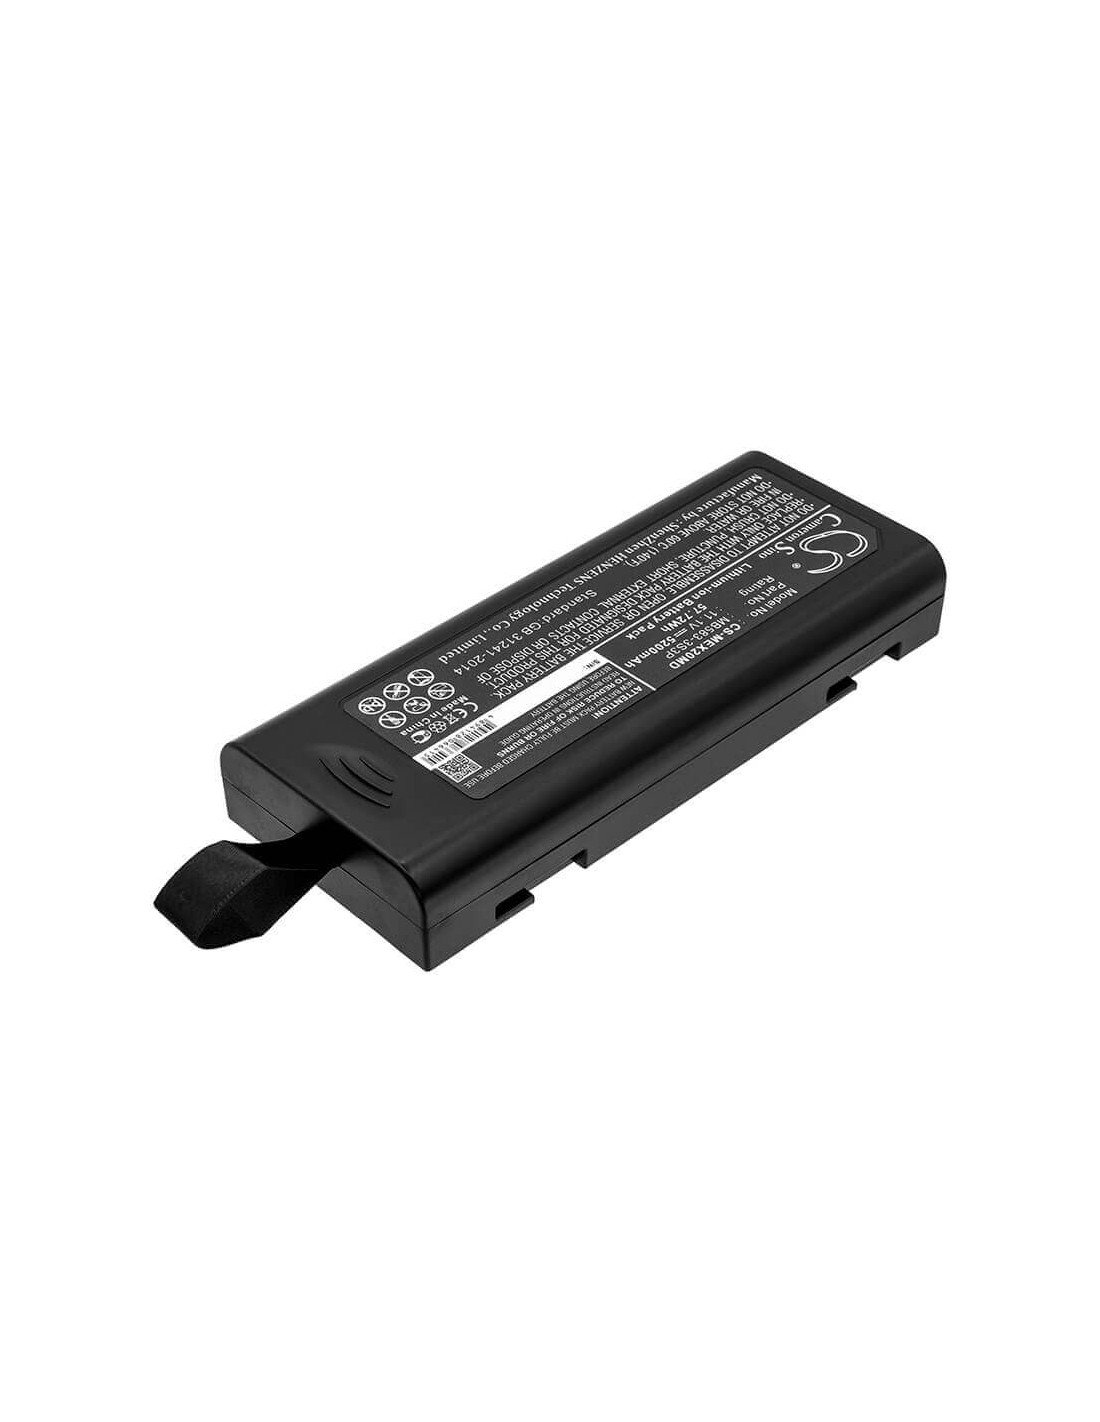 Battery for Mindray T5, T6, T8 11.1V, 5200mAh - 57.72Wh